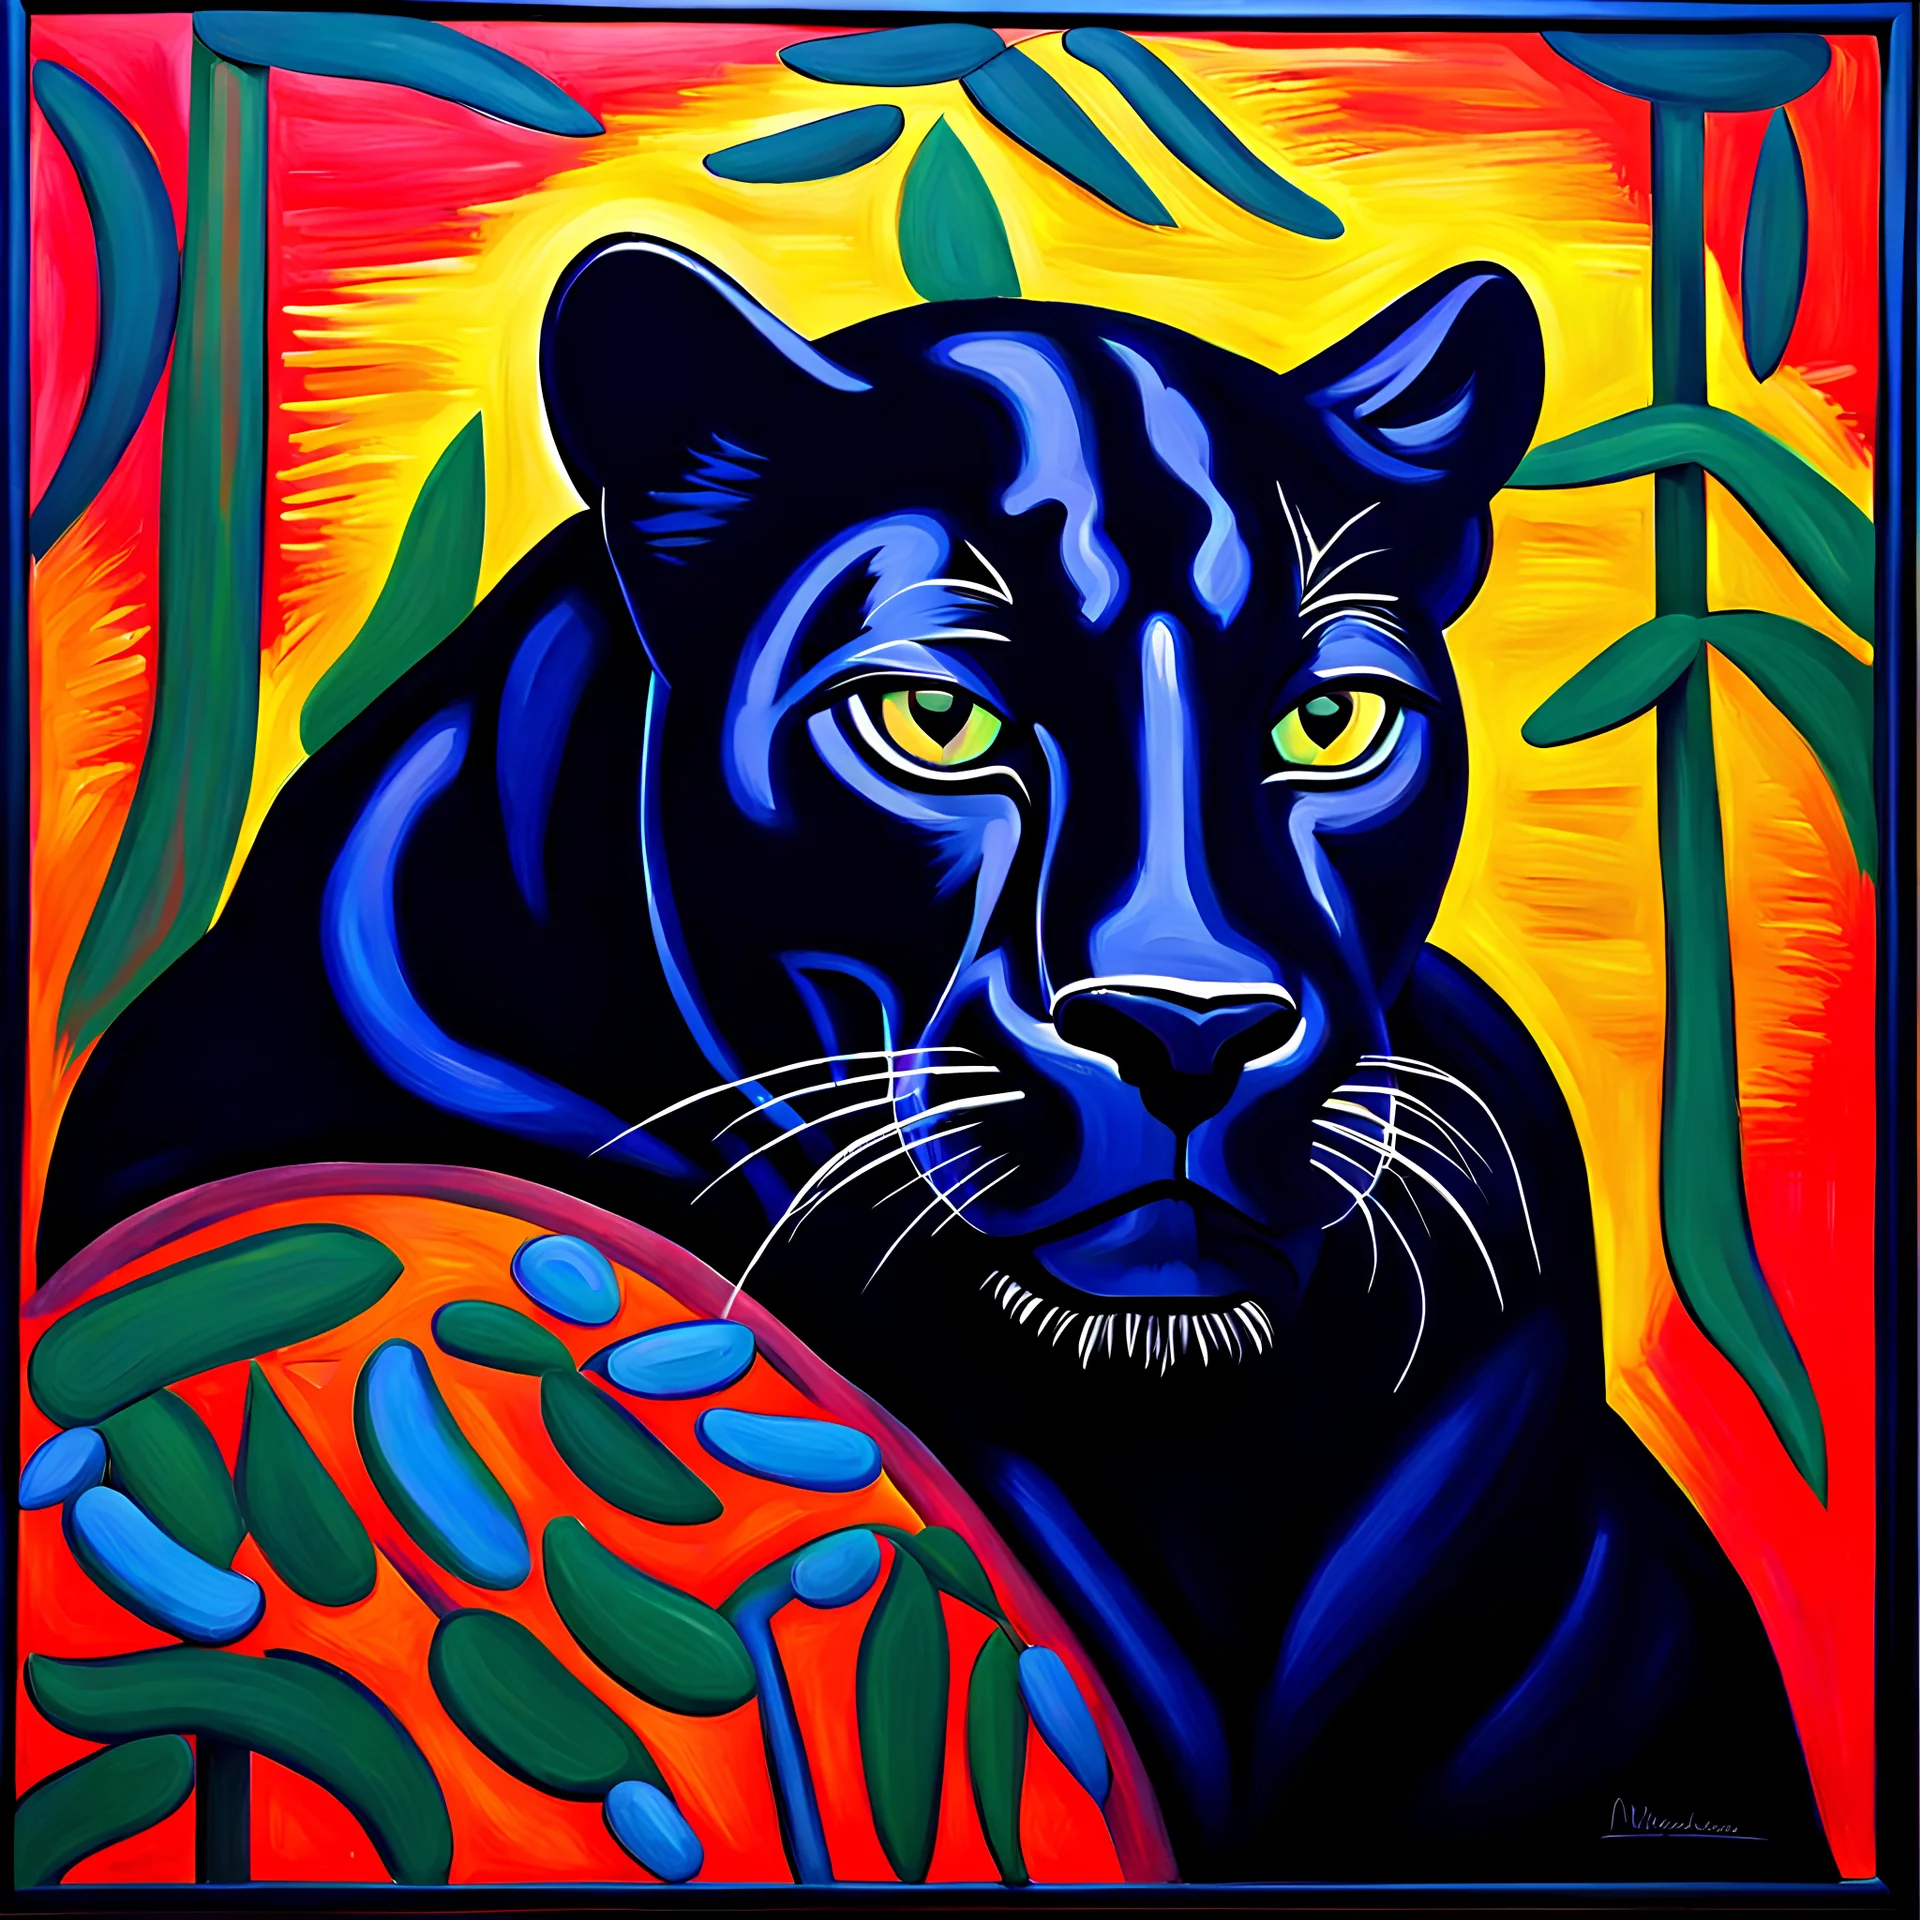 A portrait of a black panther painted by expressionist